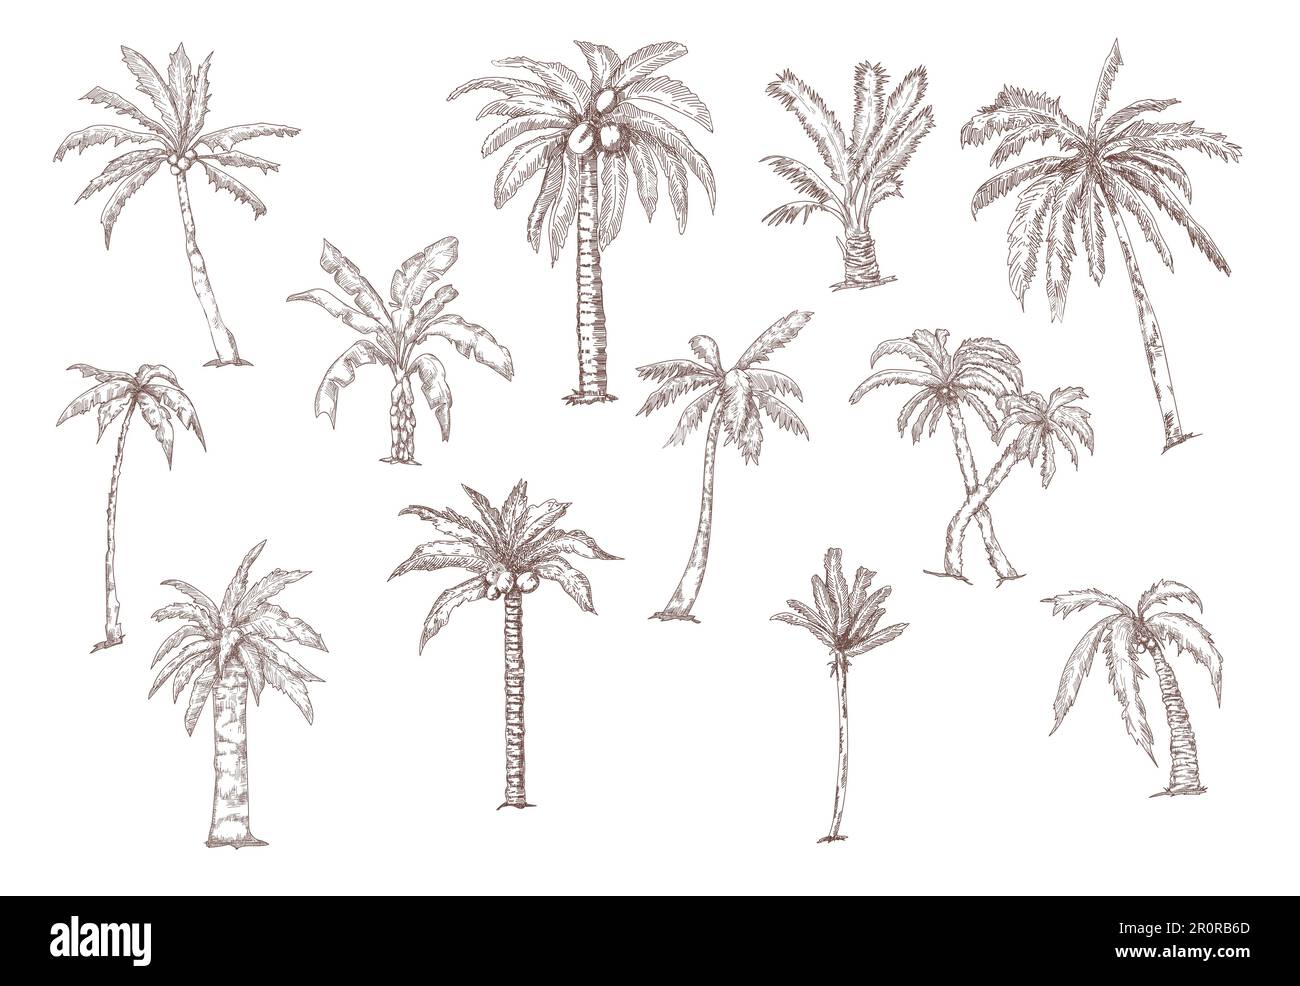 Tropical coconut palm trees sketch set Stock Vector